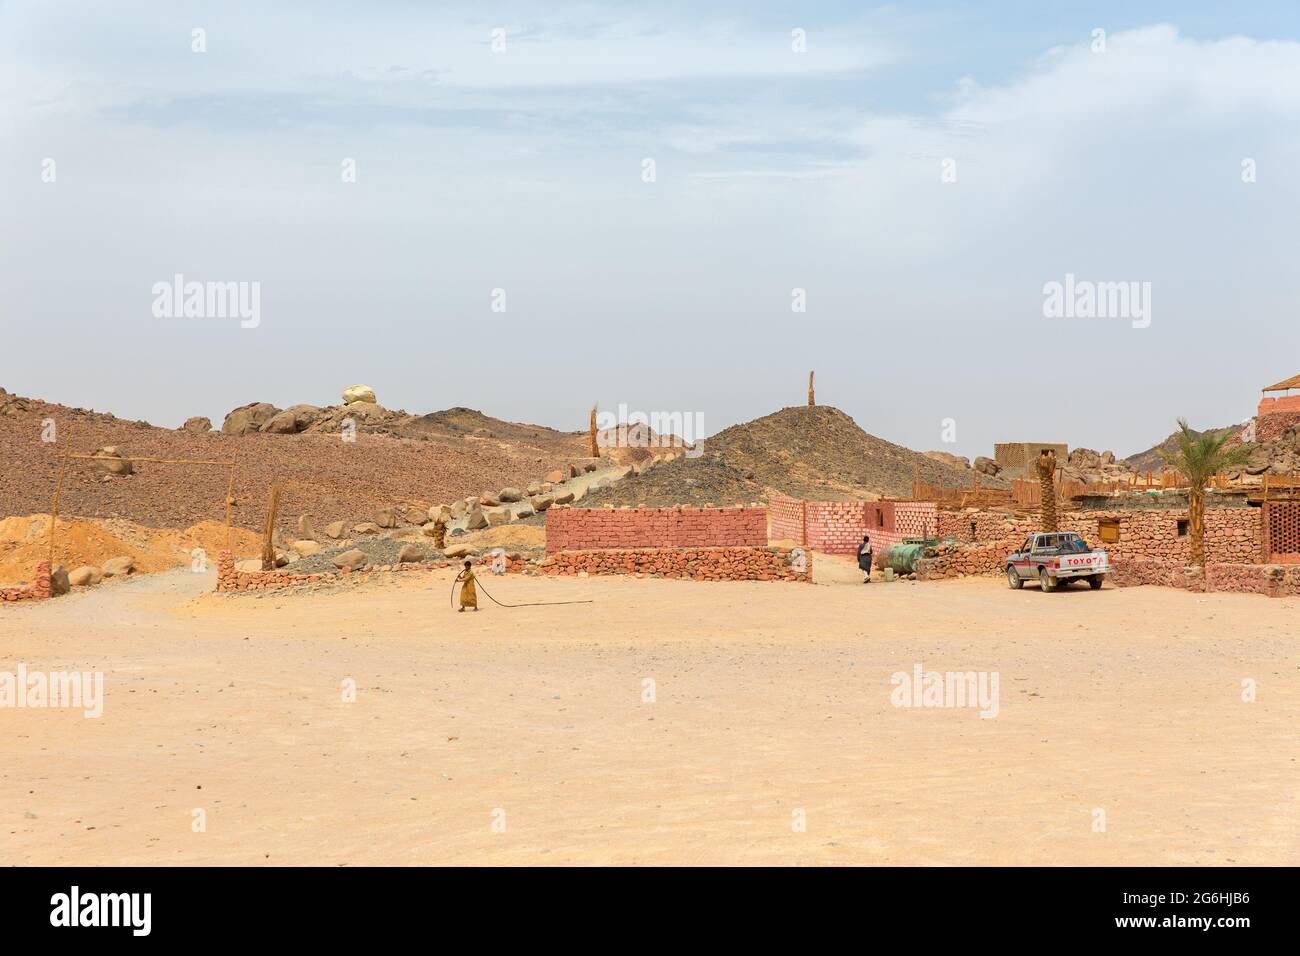 HURGHADA, EGYPT - MAY 18, 2015:The boy goes to fetch water in a Bedouin village Stock Photo